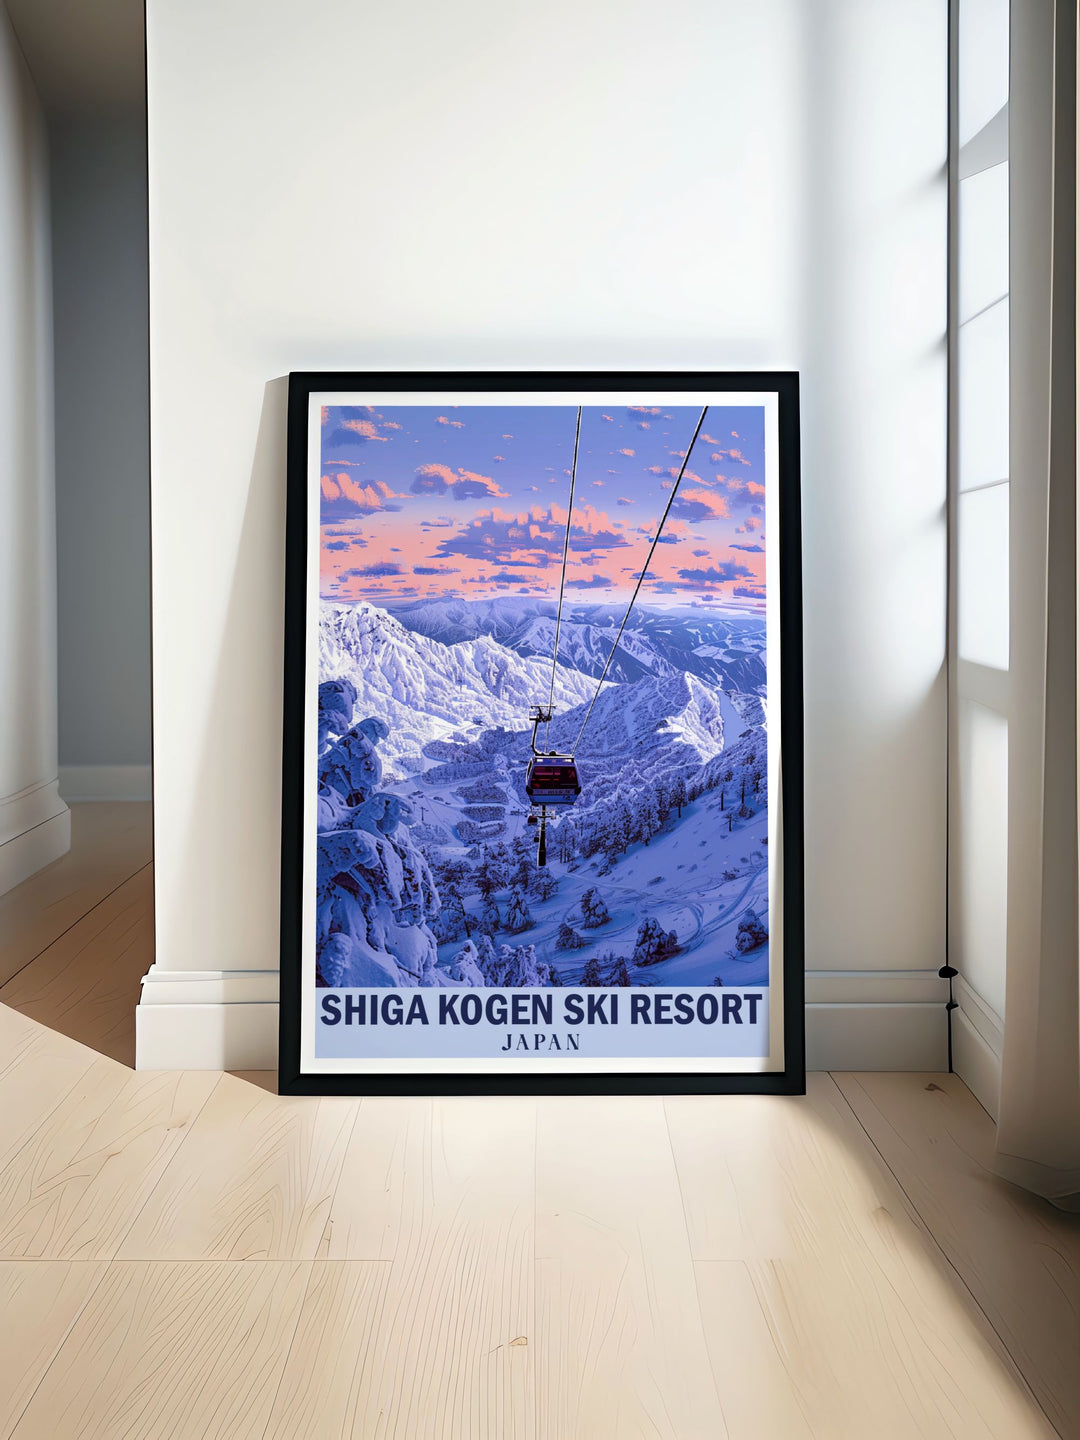 Shiga Kogen and the Japanese Alps are beautifully depicted in this travel poster, celebrating the iconic ski resort and the stunning mountain scenery of Nagano, Japan, perfect for winter sports enthusiasts.